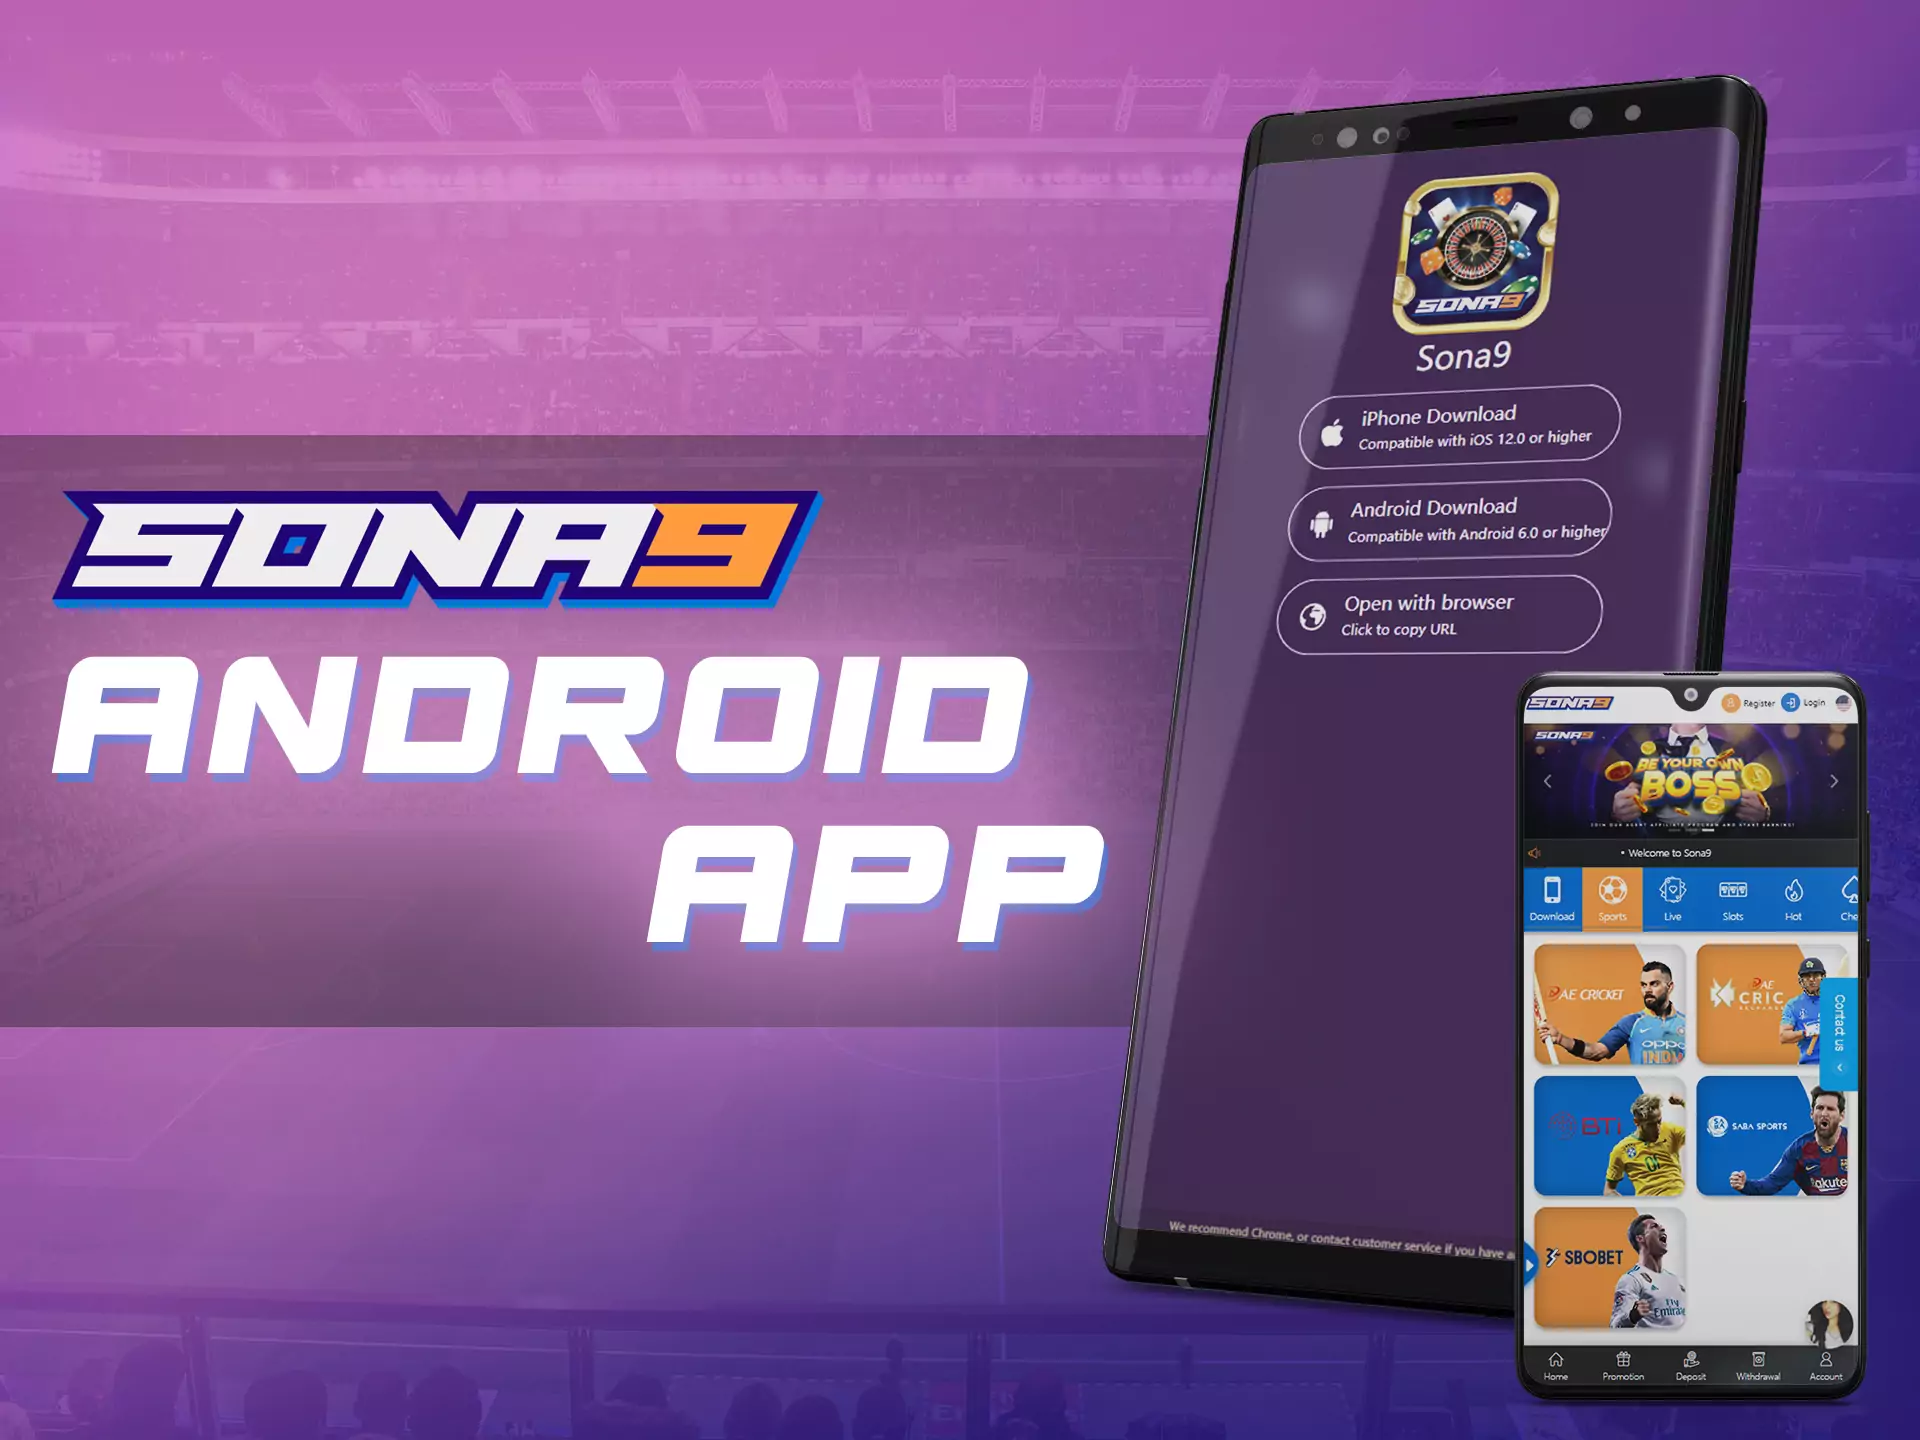 For Android devices, the Sona9 team developed a mobile app.